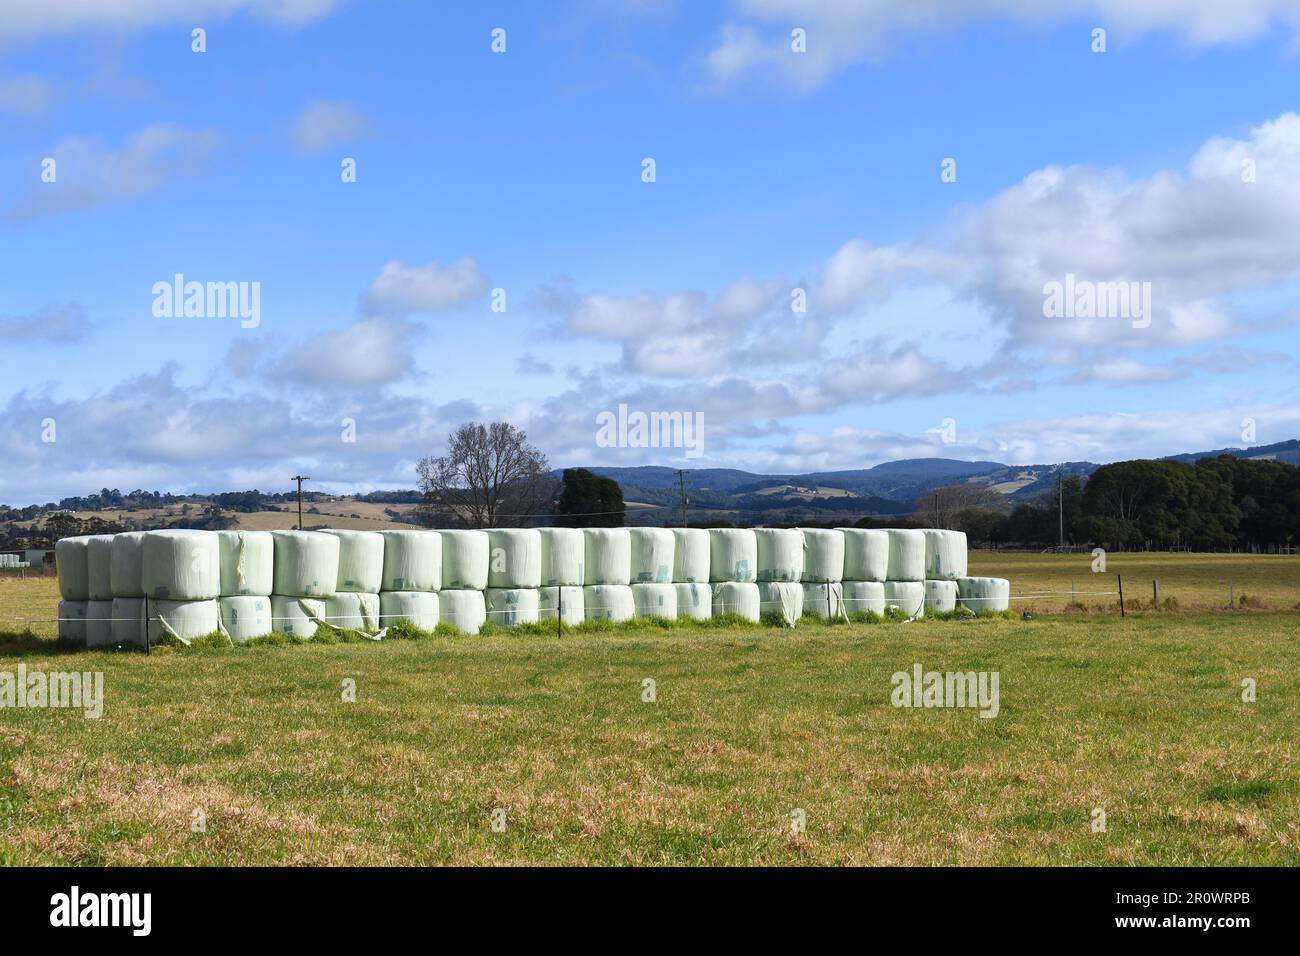 Hay roll in stack wrapped in polybag near Dorrigo, NSW, Australia: a typical rural Australian picture Stock Photo